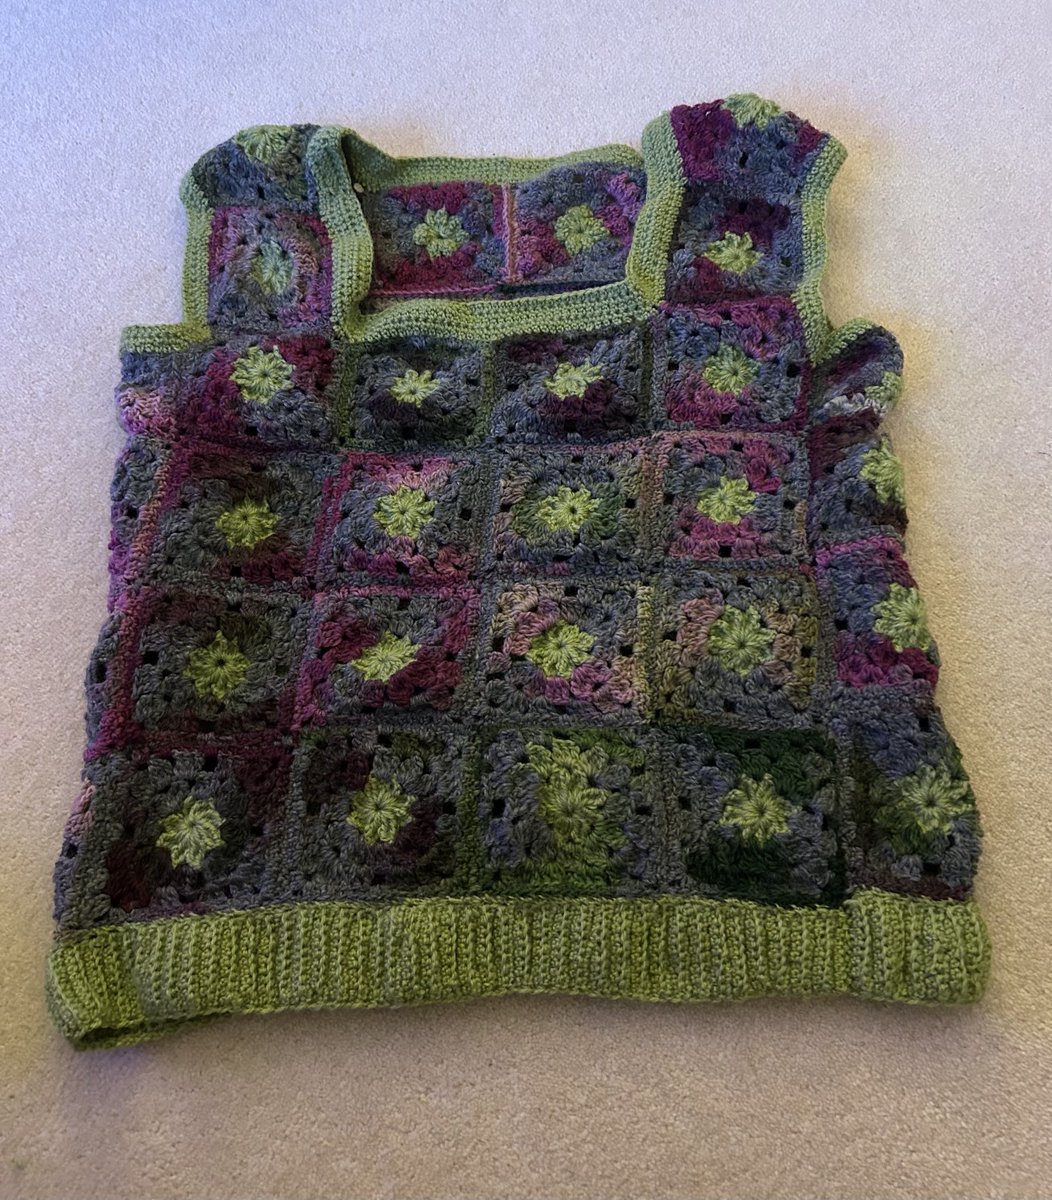 Feeling super proud! Just finished this tank top! It’s taken AGES! #crochet #handmade